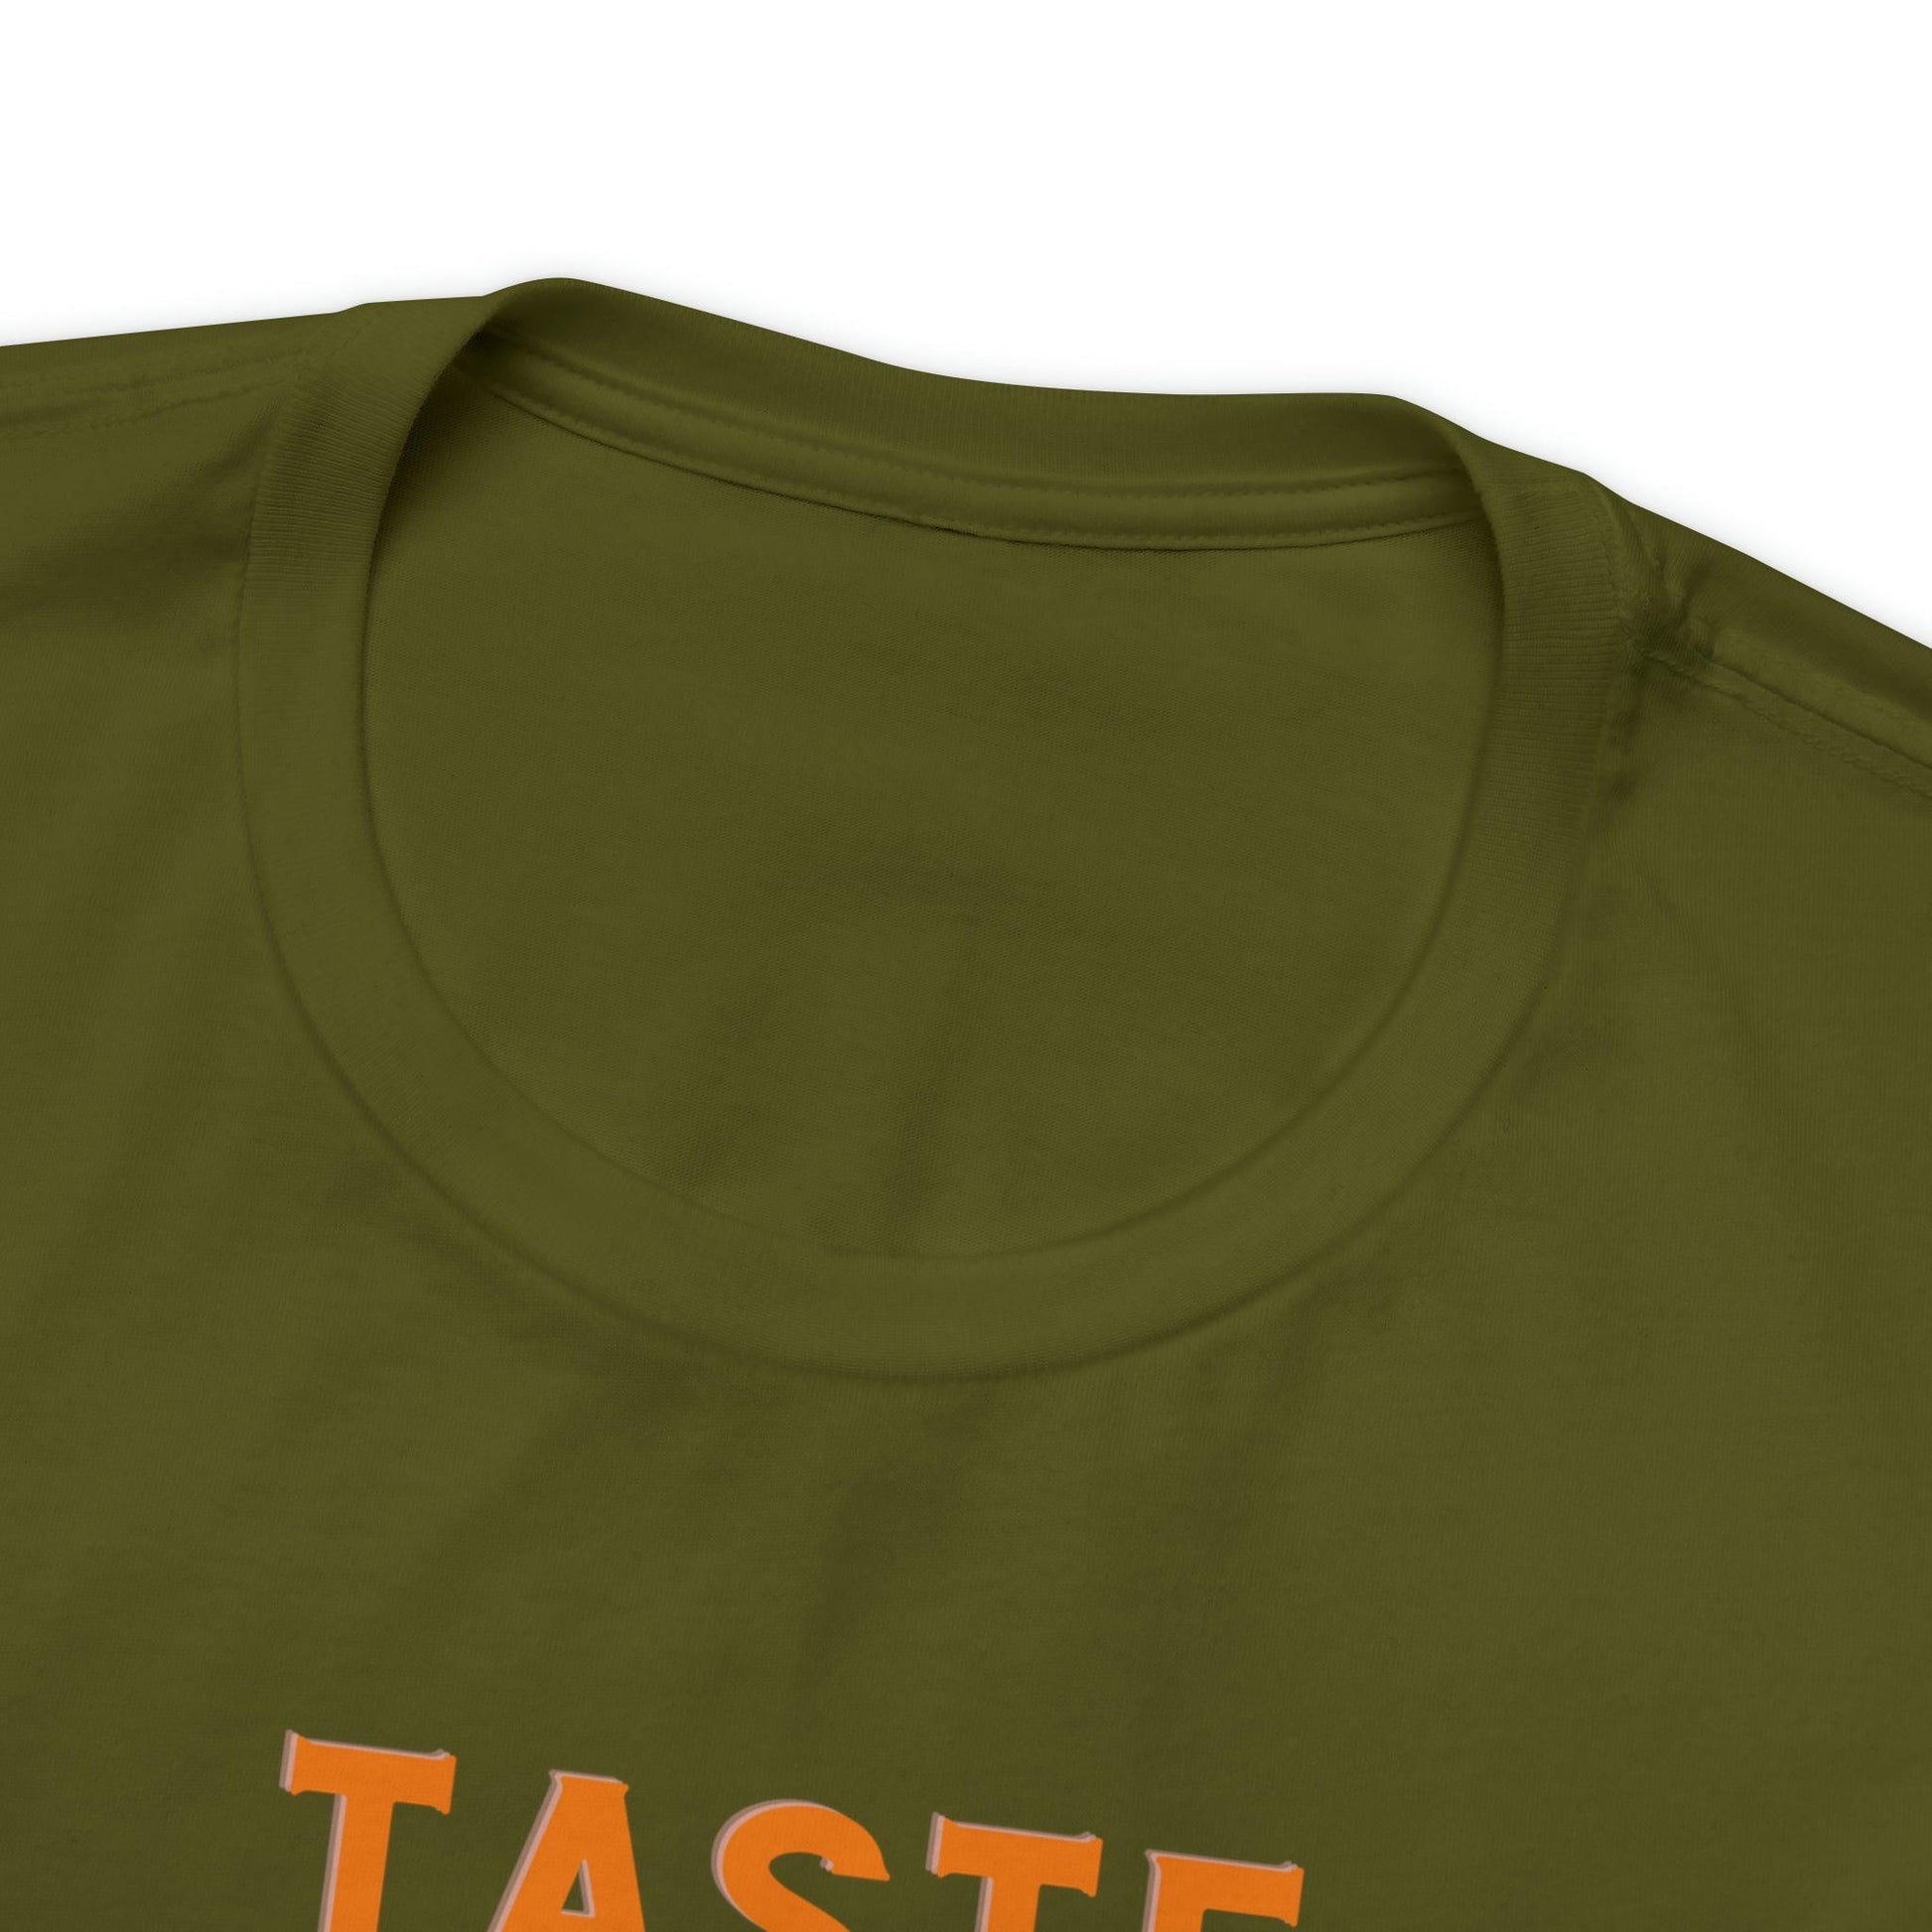 Taste the Biscuit - Wicked Naughty Apparel